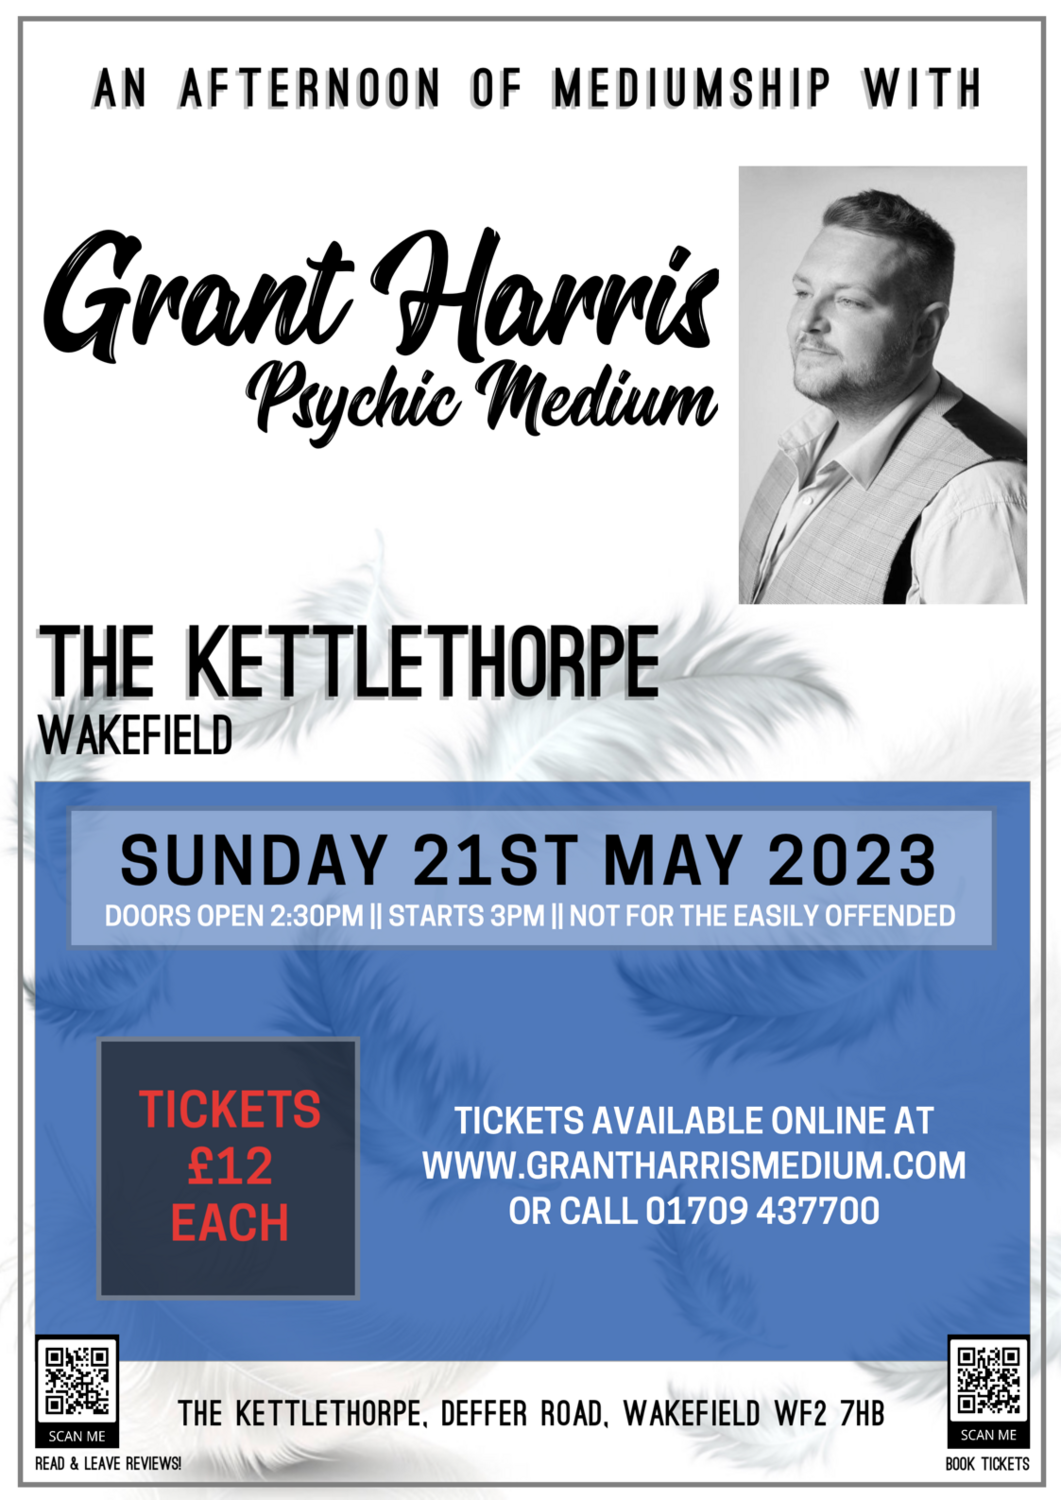 The Kettlethorpe, Wakefield, Sunday 21st May 2023 - Afternoon Event 3pm